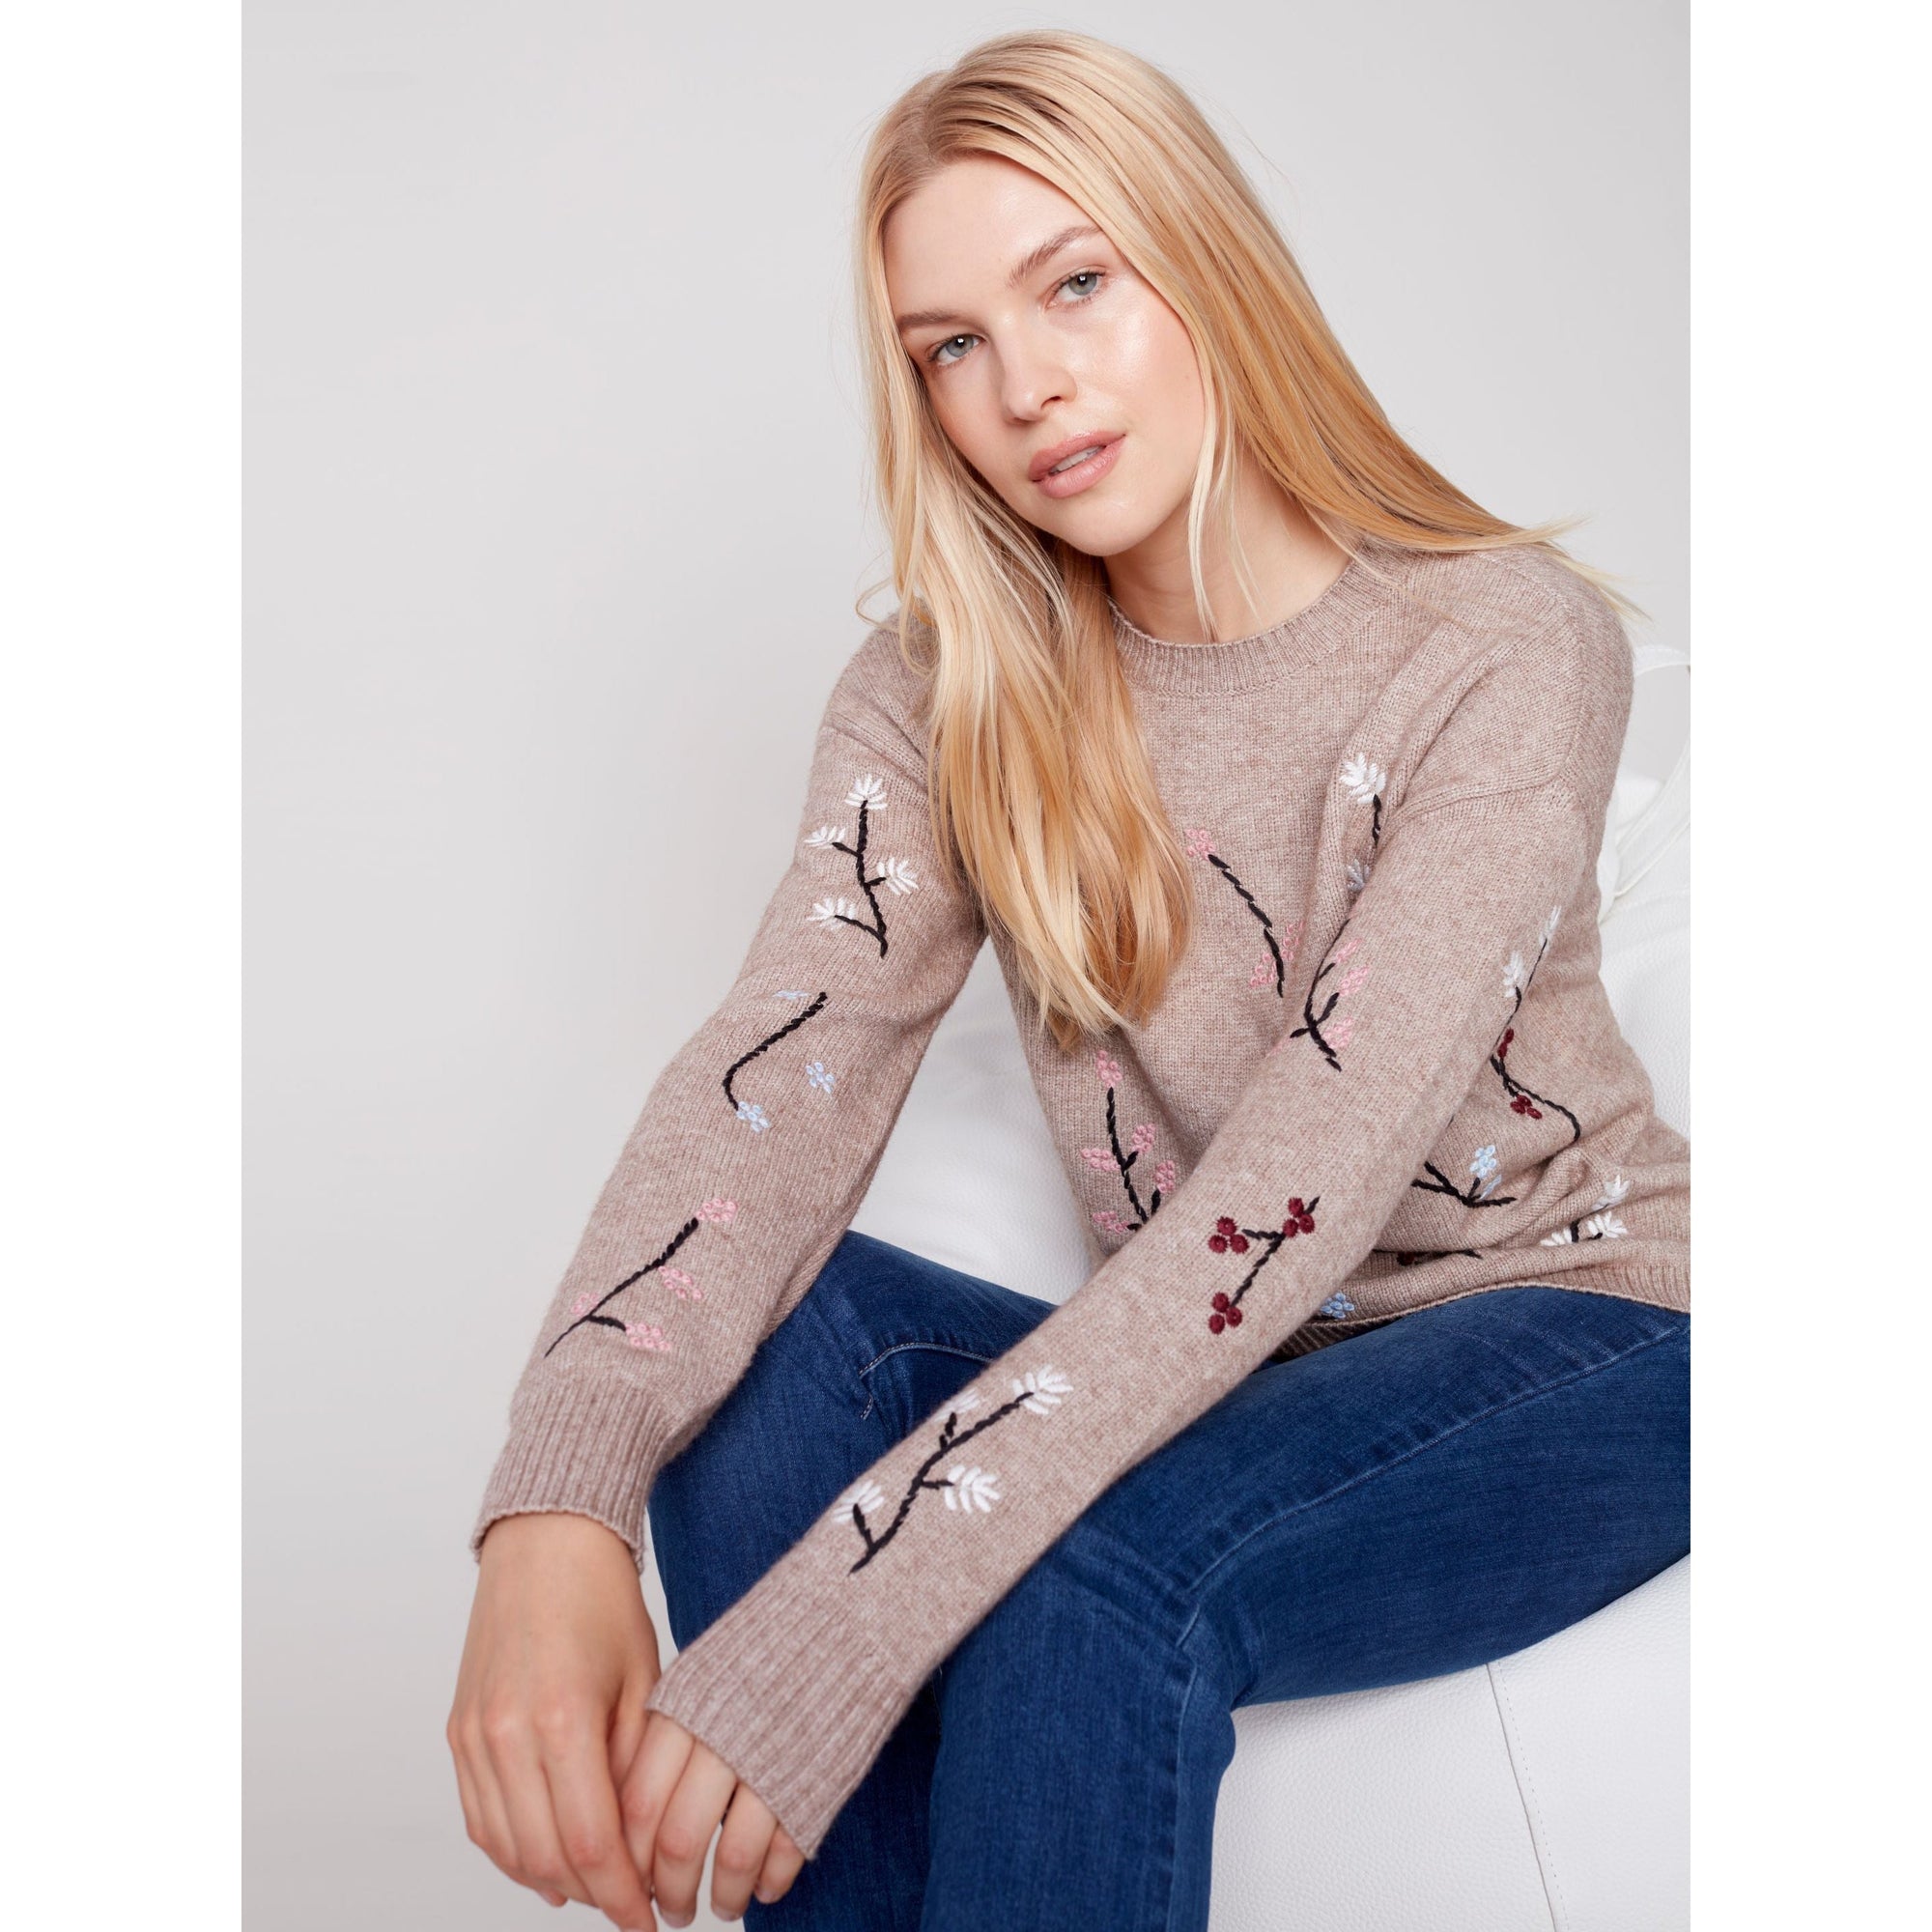 FLORAL EMBROIDERY CREW NECK SWEATER-Jackets & Sweaters-CHARLIE B-Coriander